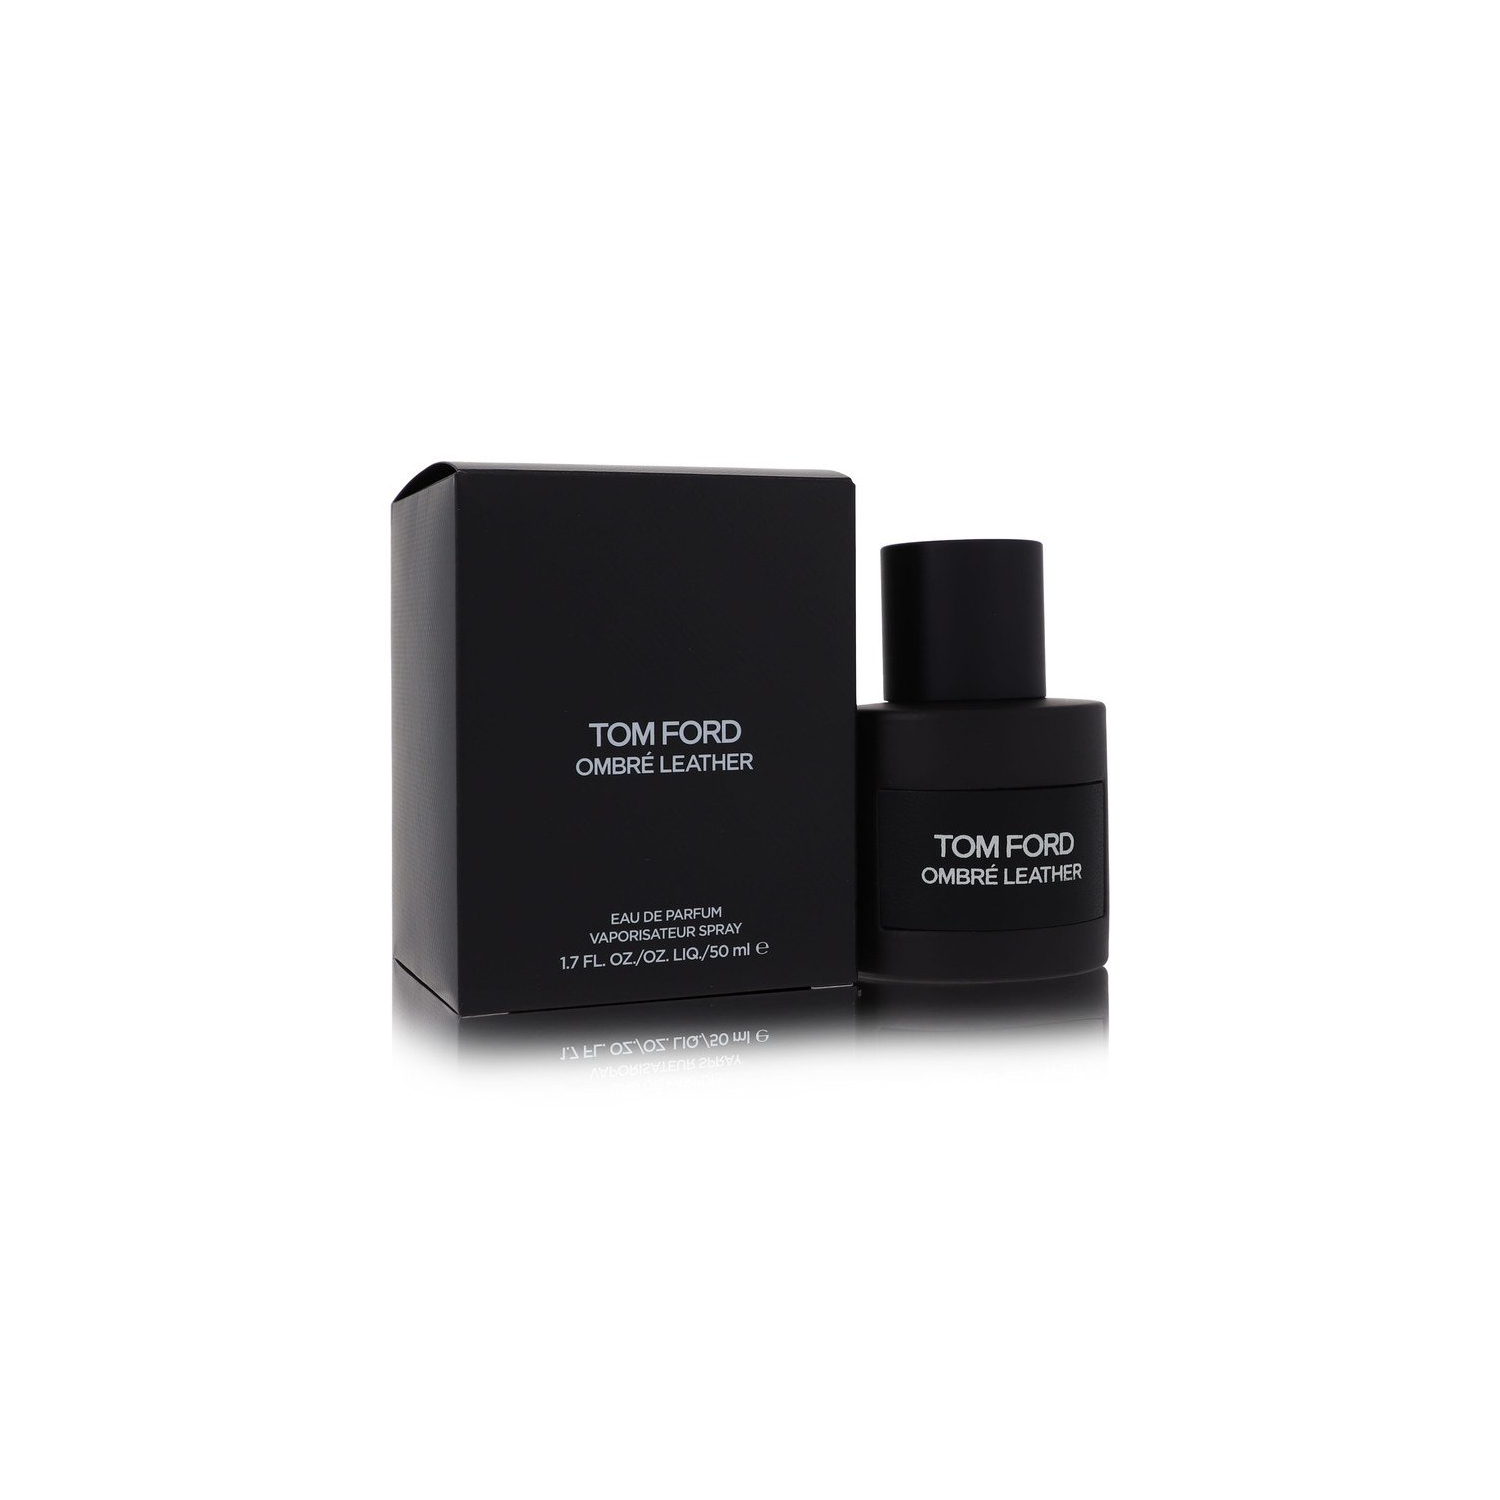 Tom Ford Ombre Leather by Tom Ford